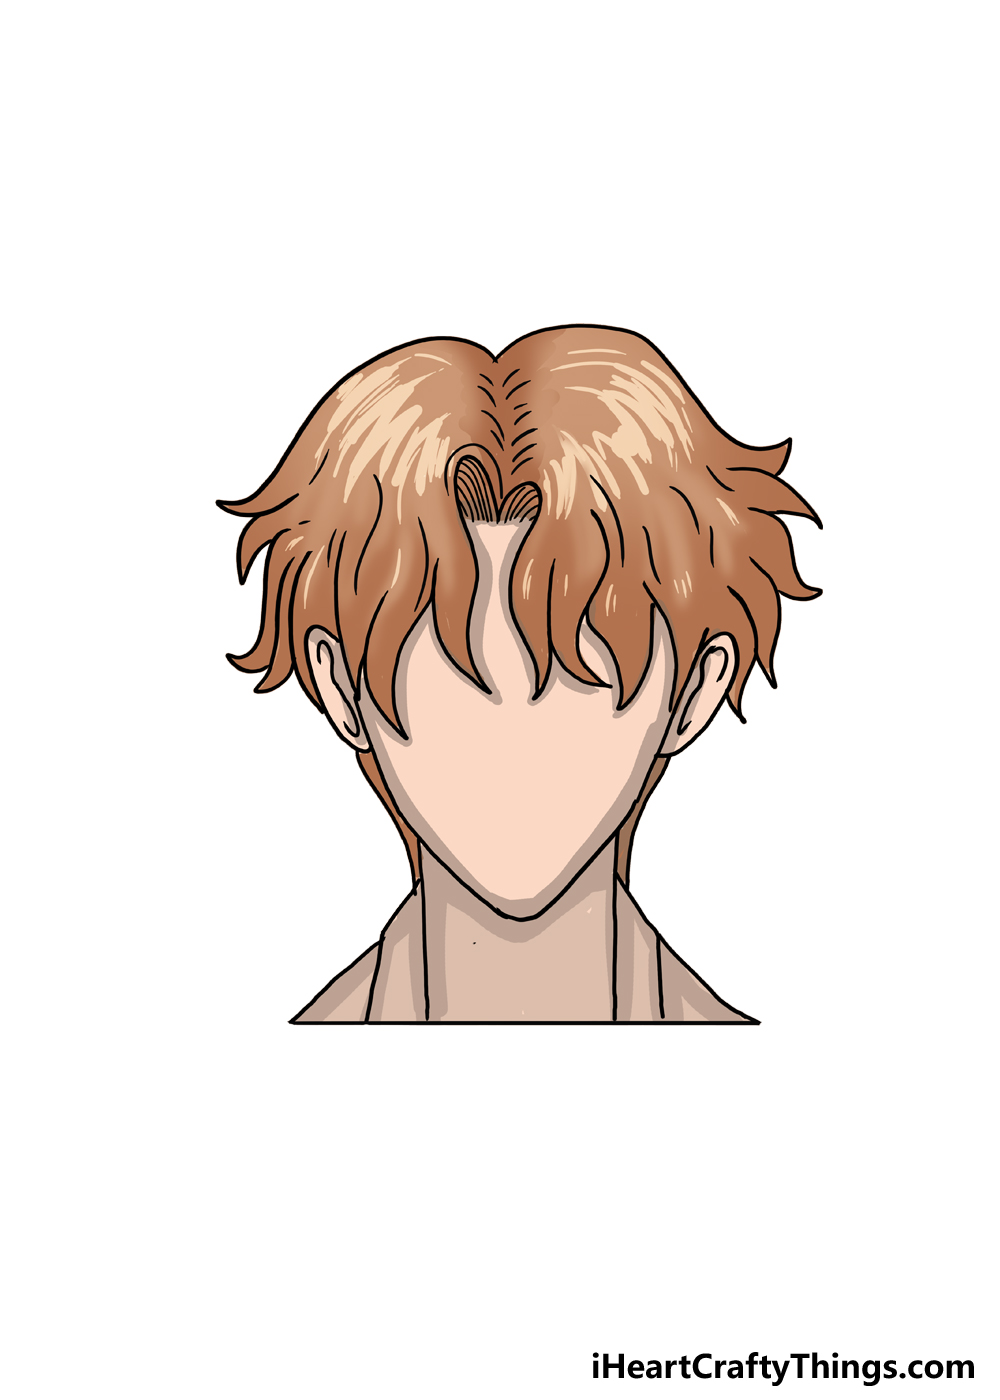 1,273 Boy Hairstyles Anime Hairstyles Images, Stock Photos & Vectors |  Shutterstock